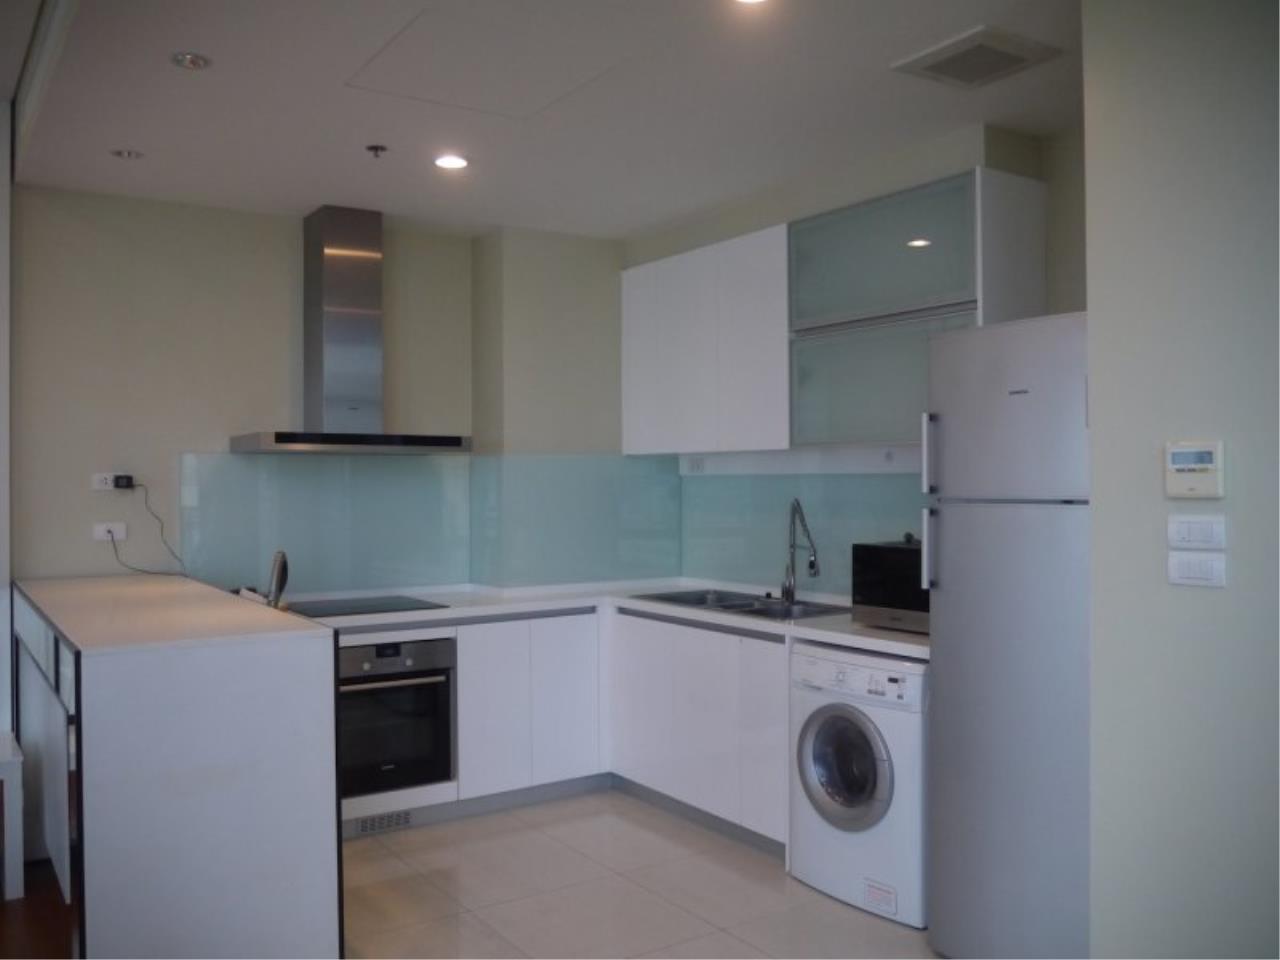 Piri Property Agency's Duplex 3 Bedrooms in the Bright Condo for rent on high floor 4